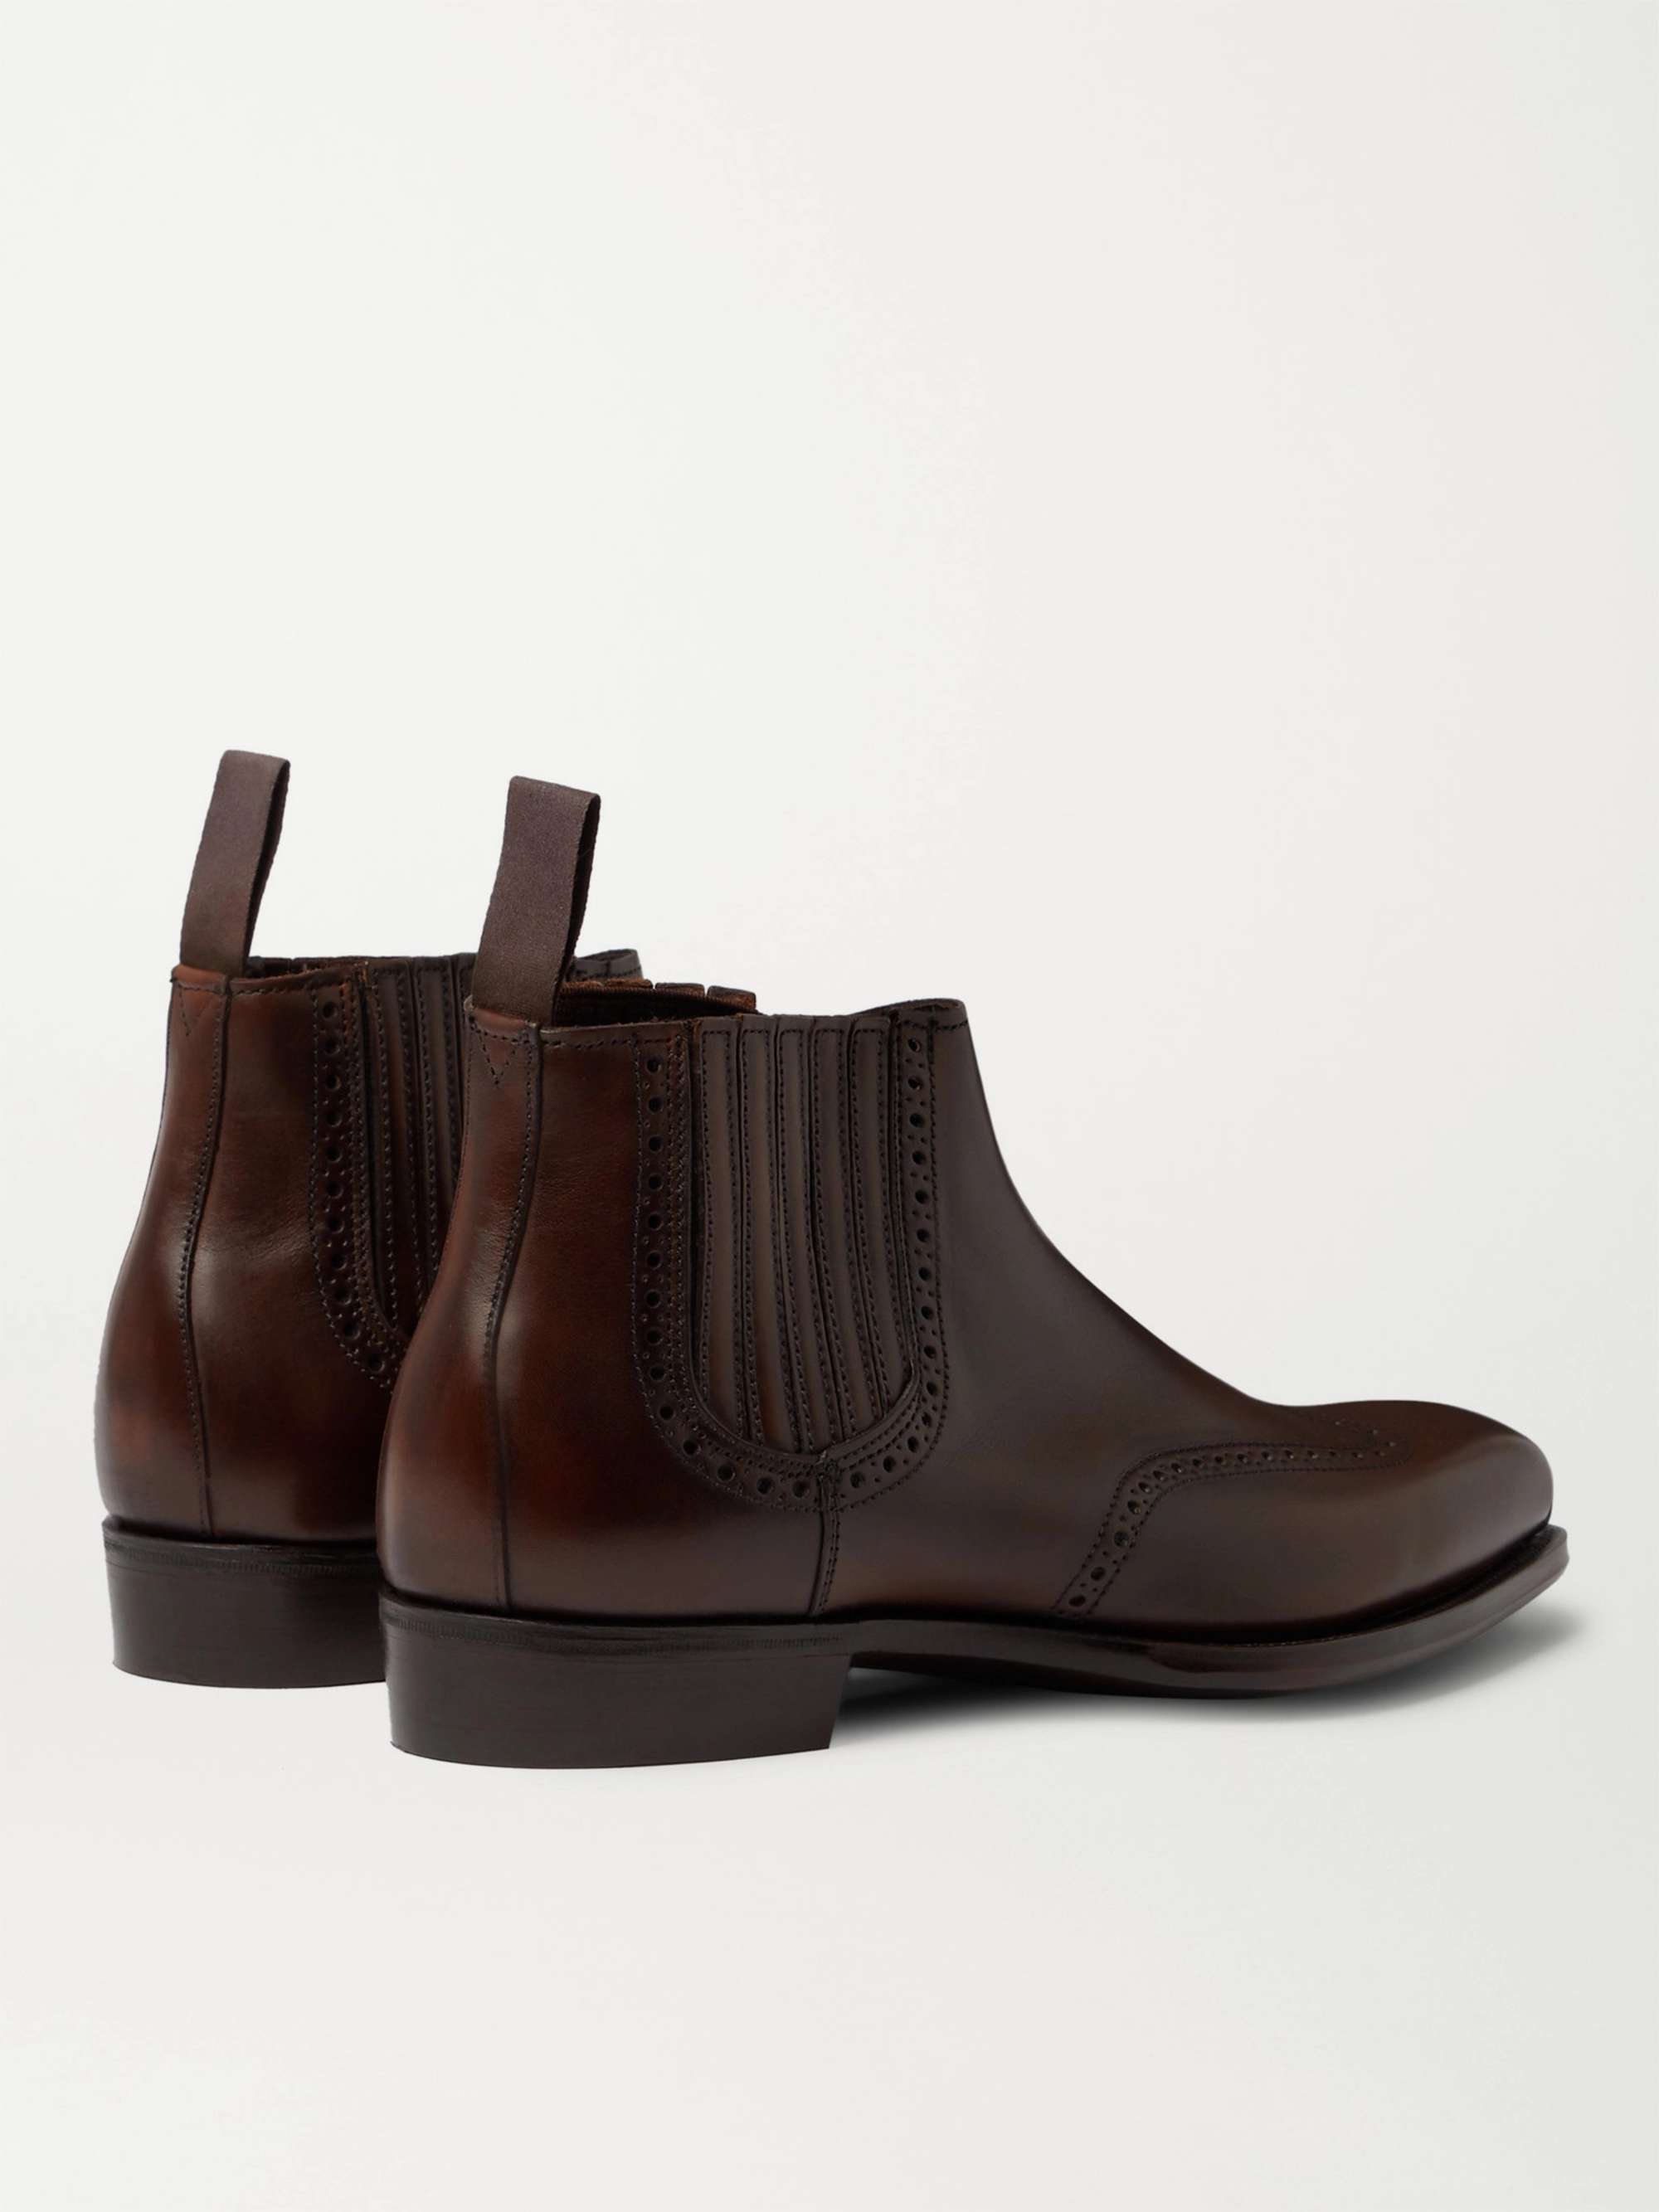 KINGSMAN + George Cleverley Veronique Leather Brogue Chelsea Boots